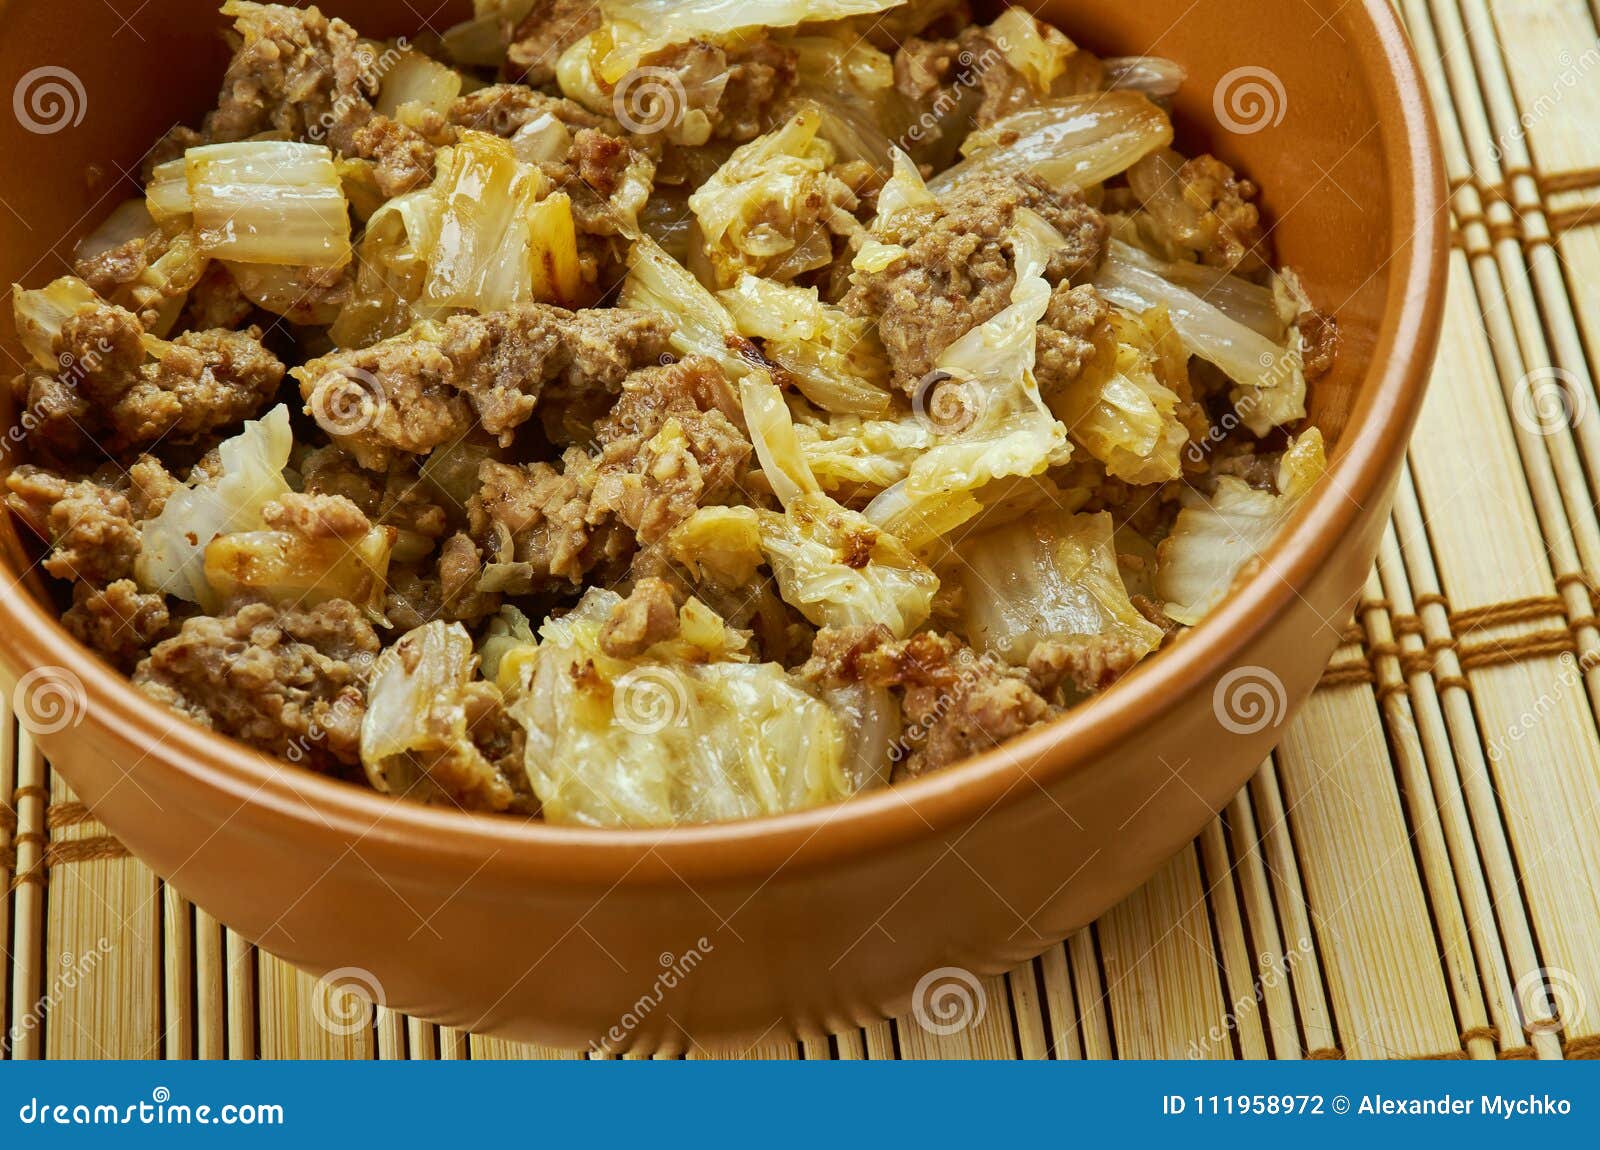 Ground Beef and Cabbage Casserole Stock Photo - Image of fresh, herb ...